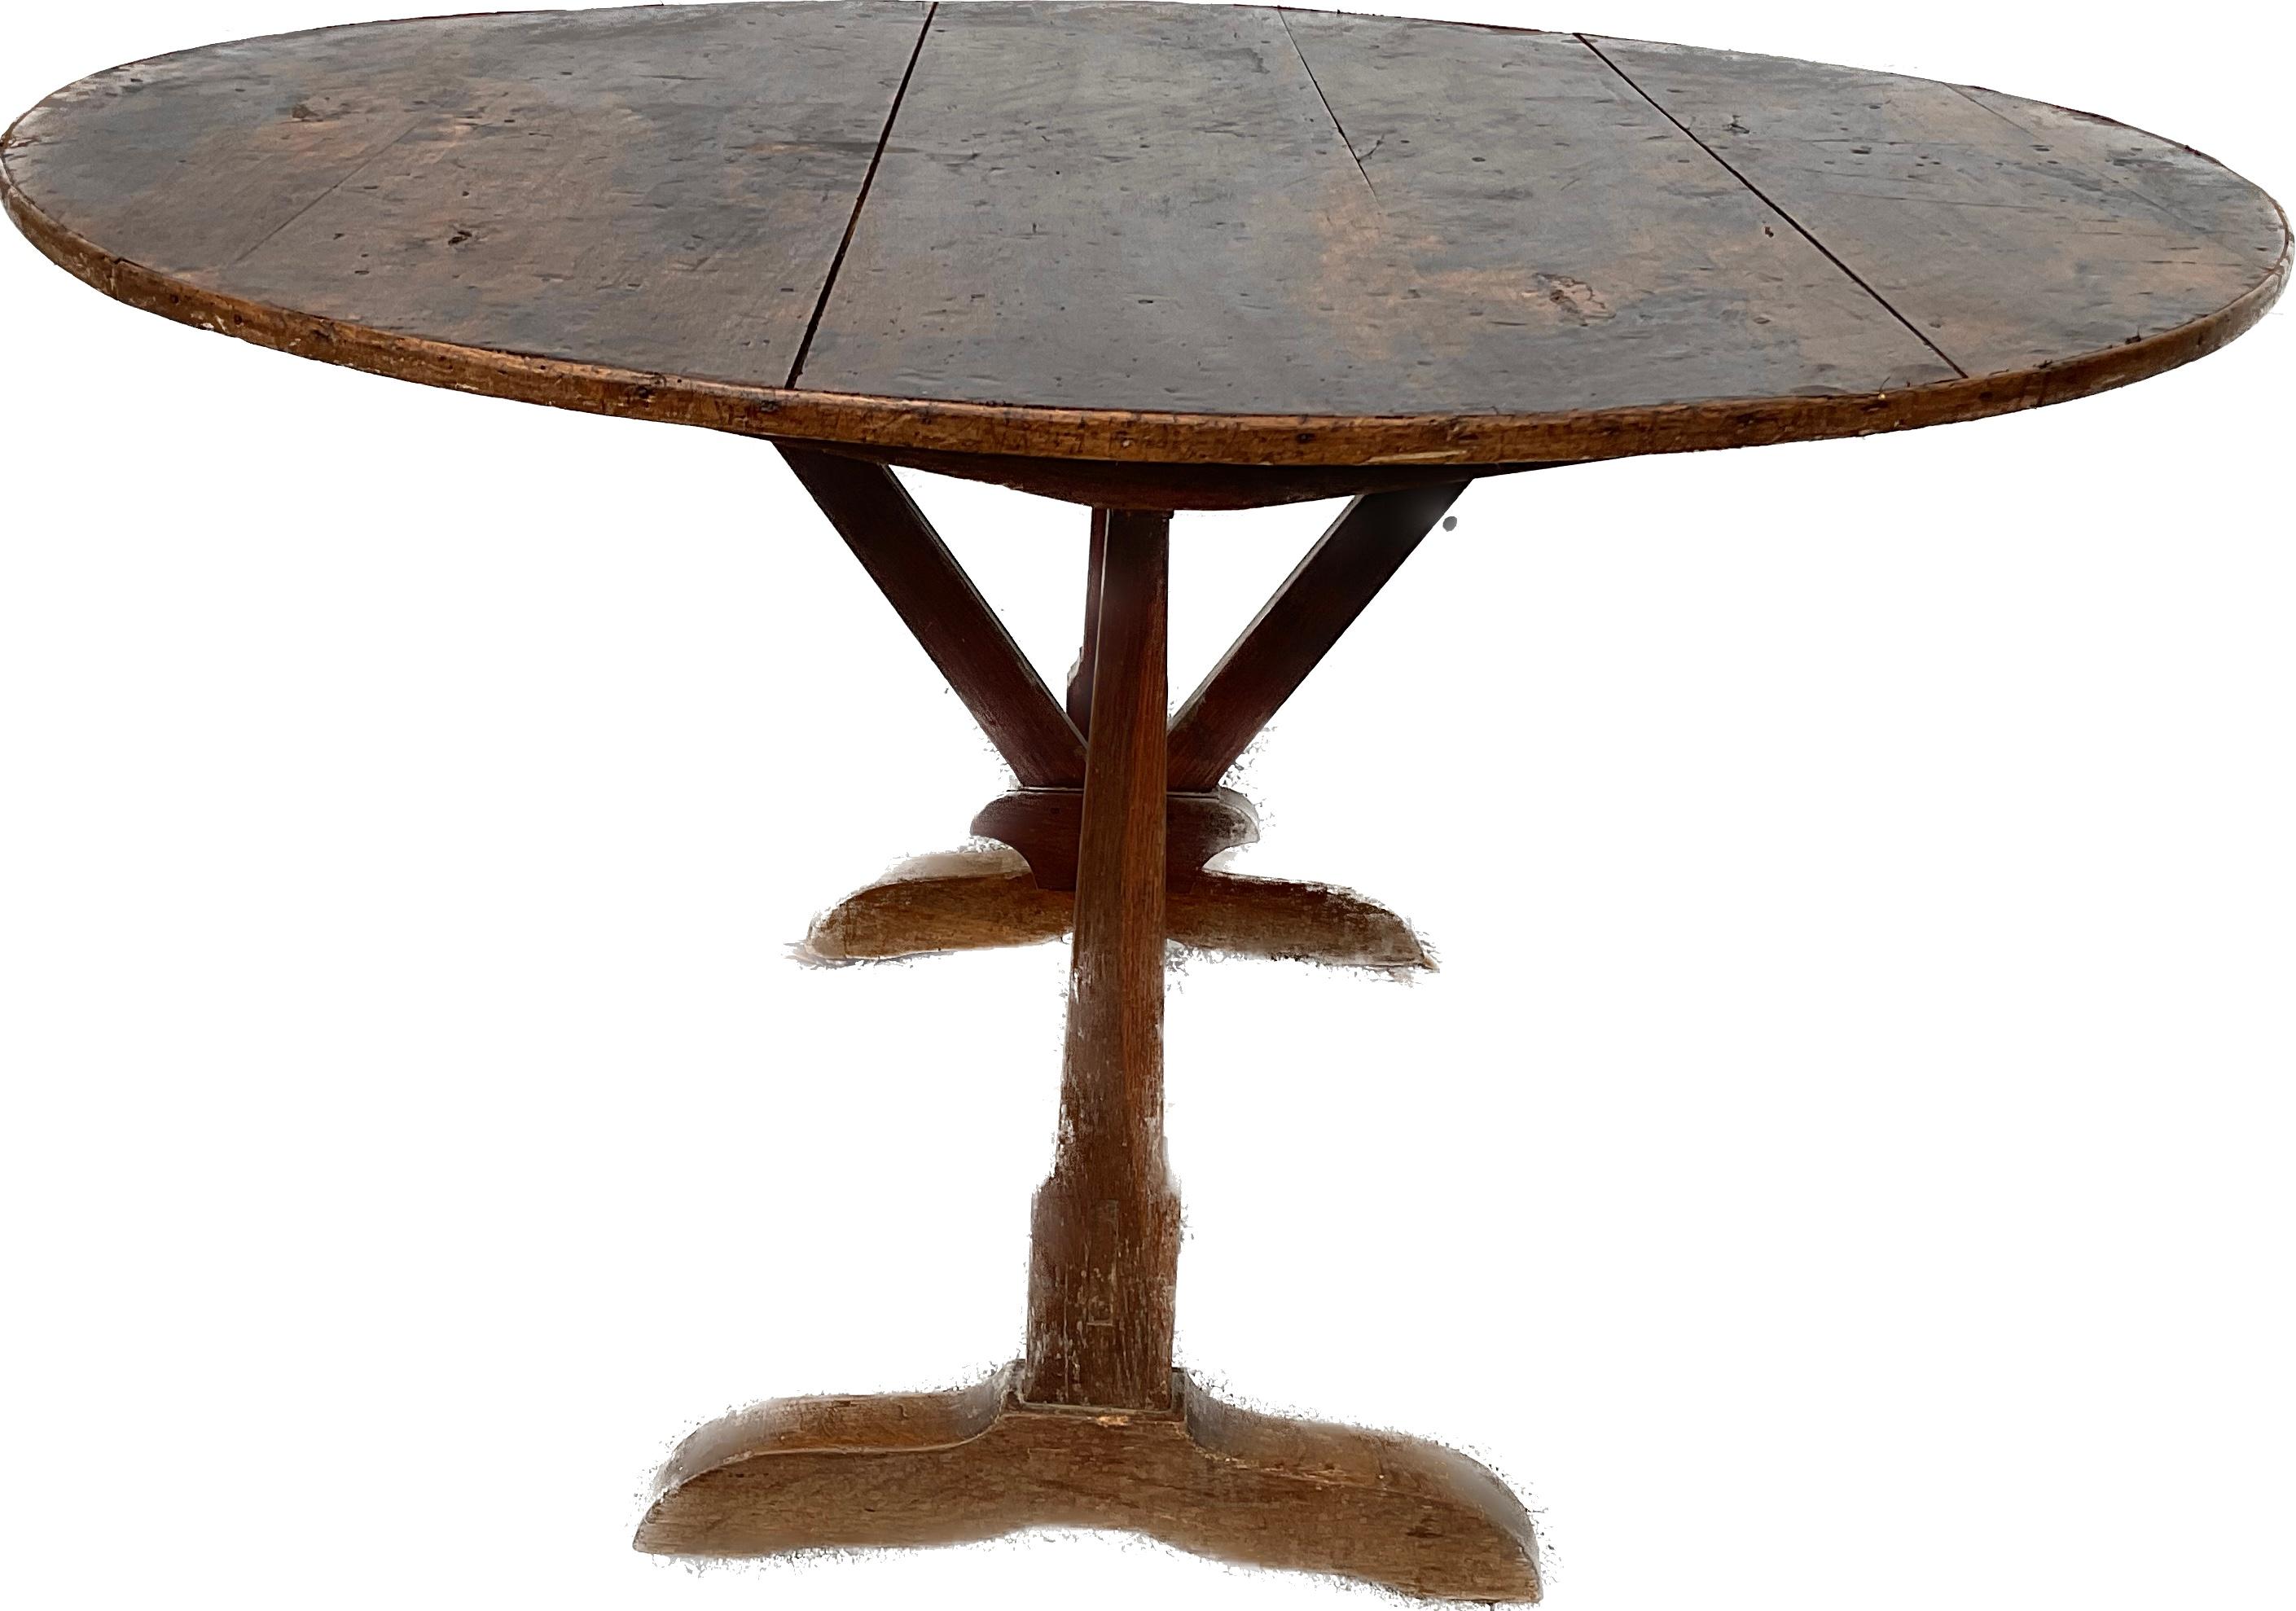 19th century Tilt-top French wine tasting table. The top can be positioned vertically for storage and opened for use as a side or dining table.